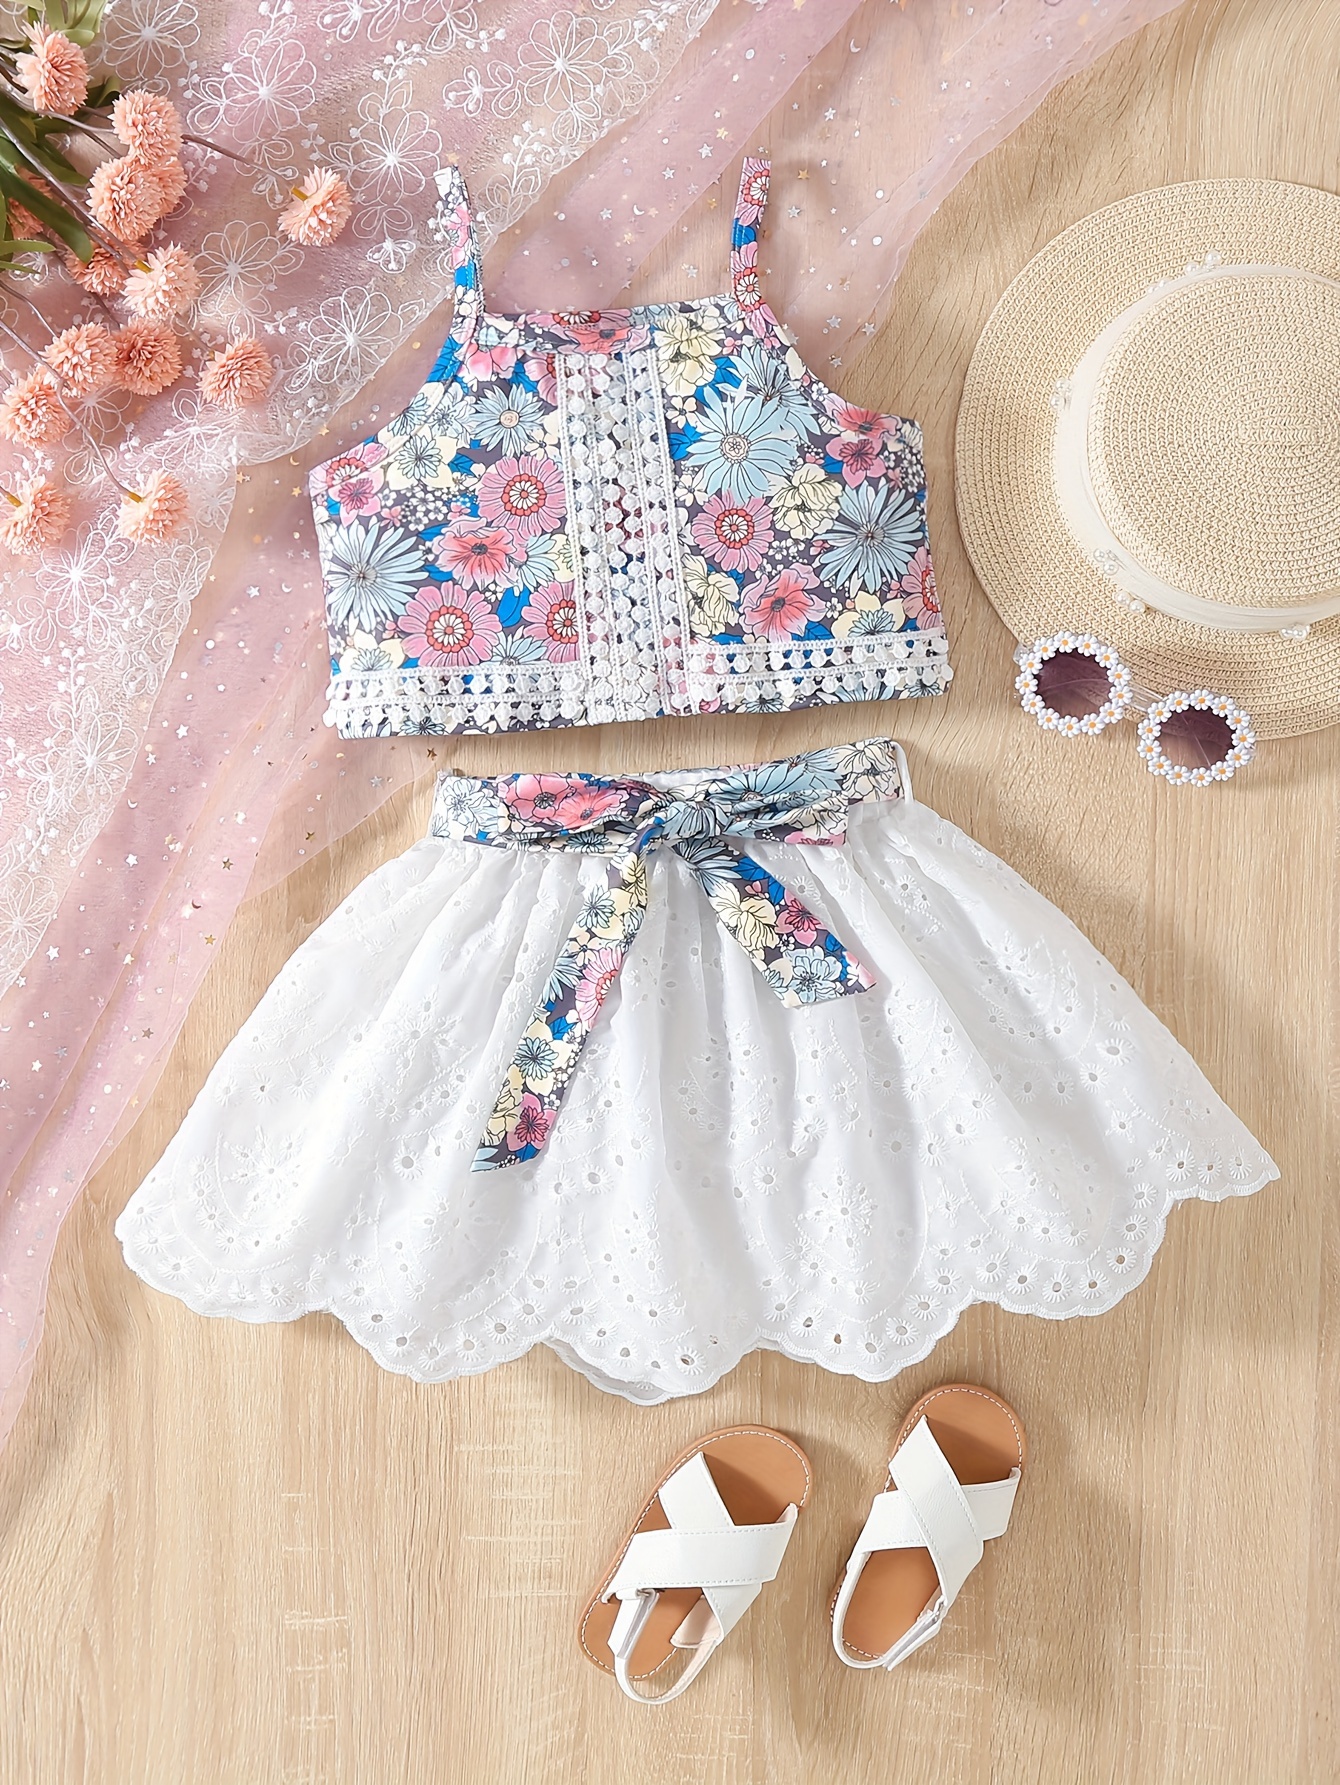 XMMSWDLA Toddler Girl Clothes Baby Girls Fashion Cute Flowers Print Lcae  Hollow Out Skirt Suspenders Top Suit